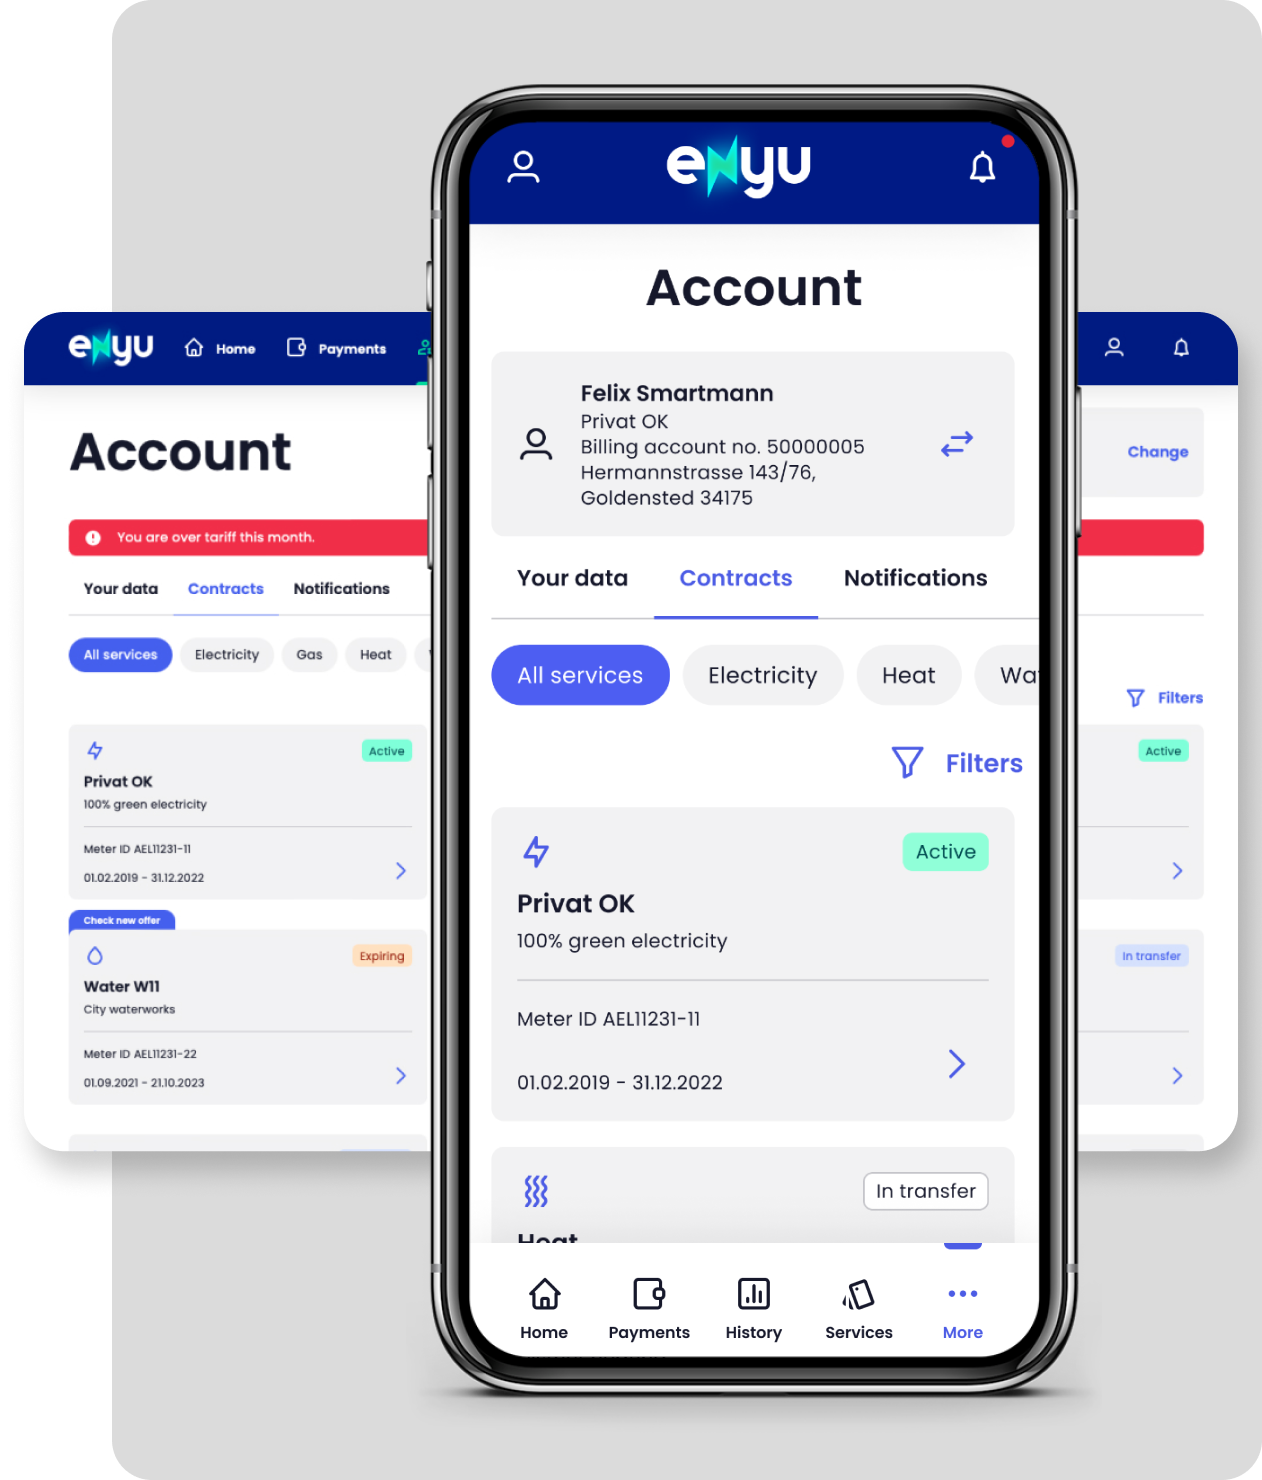 Enyu mobile app for energy and utilities - your account view